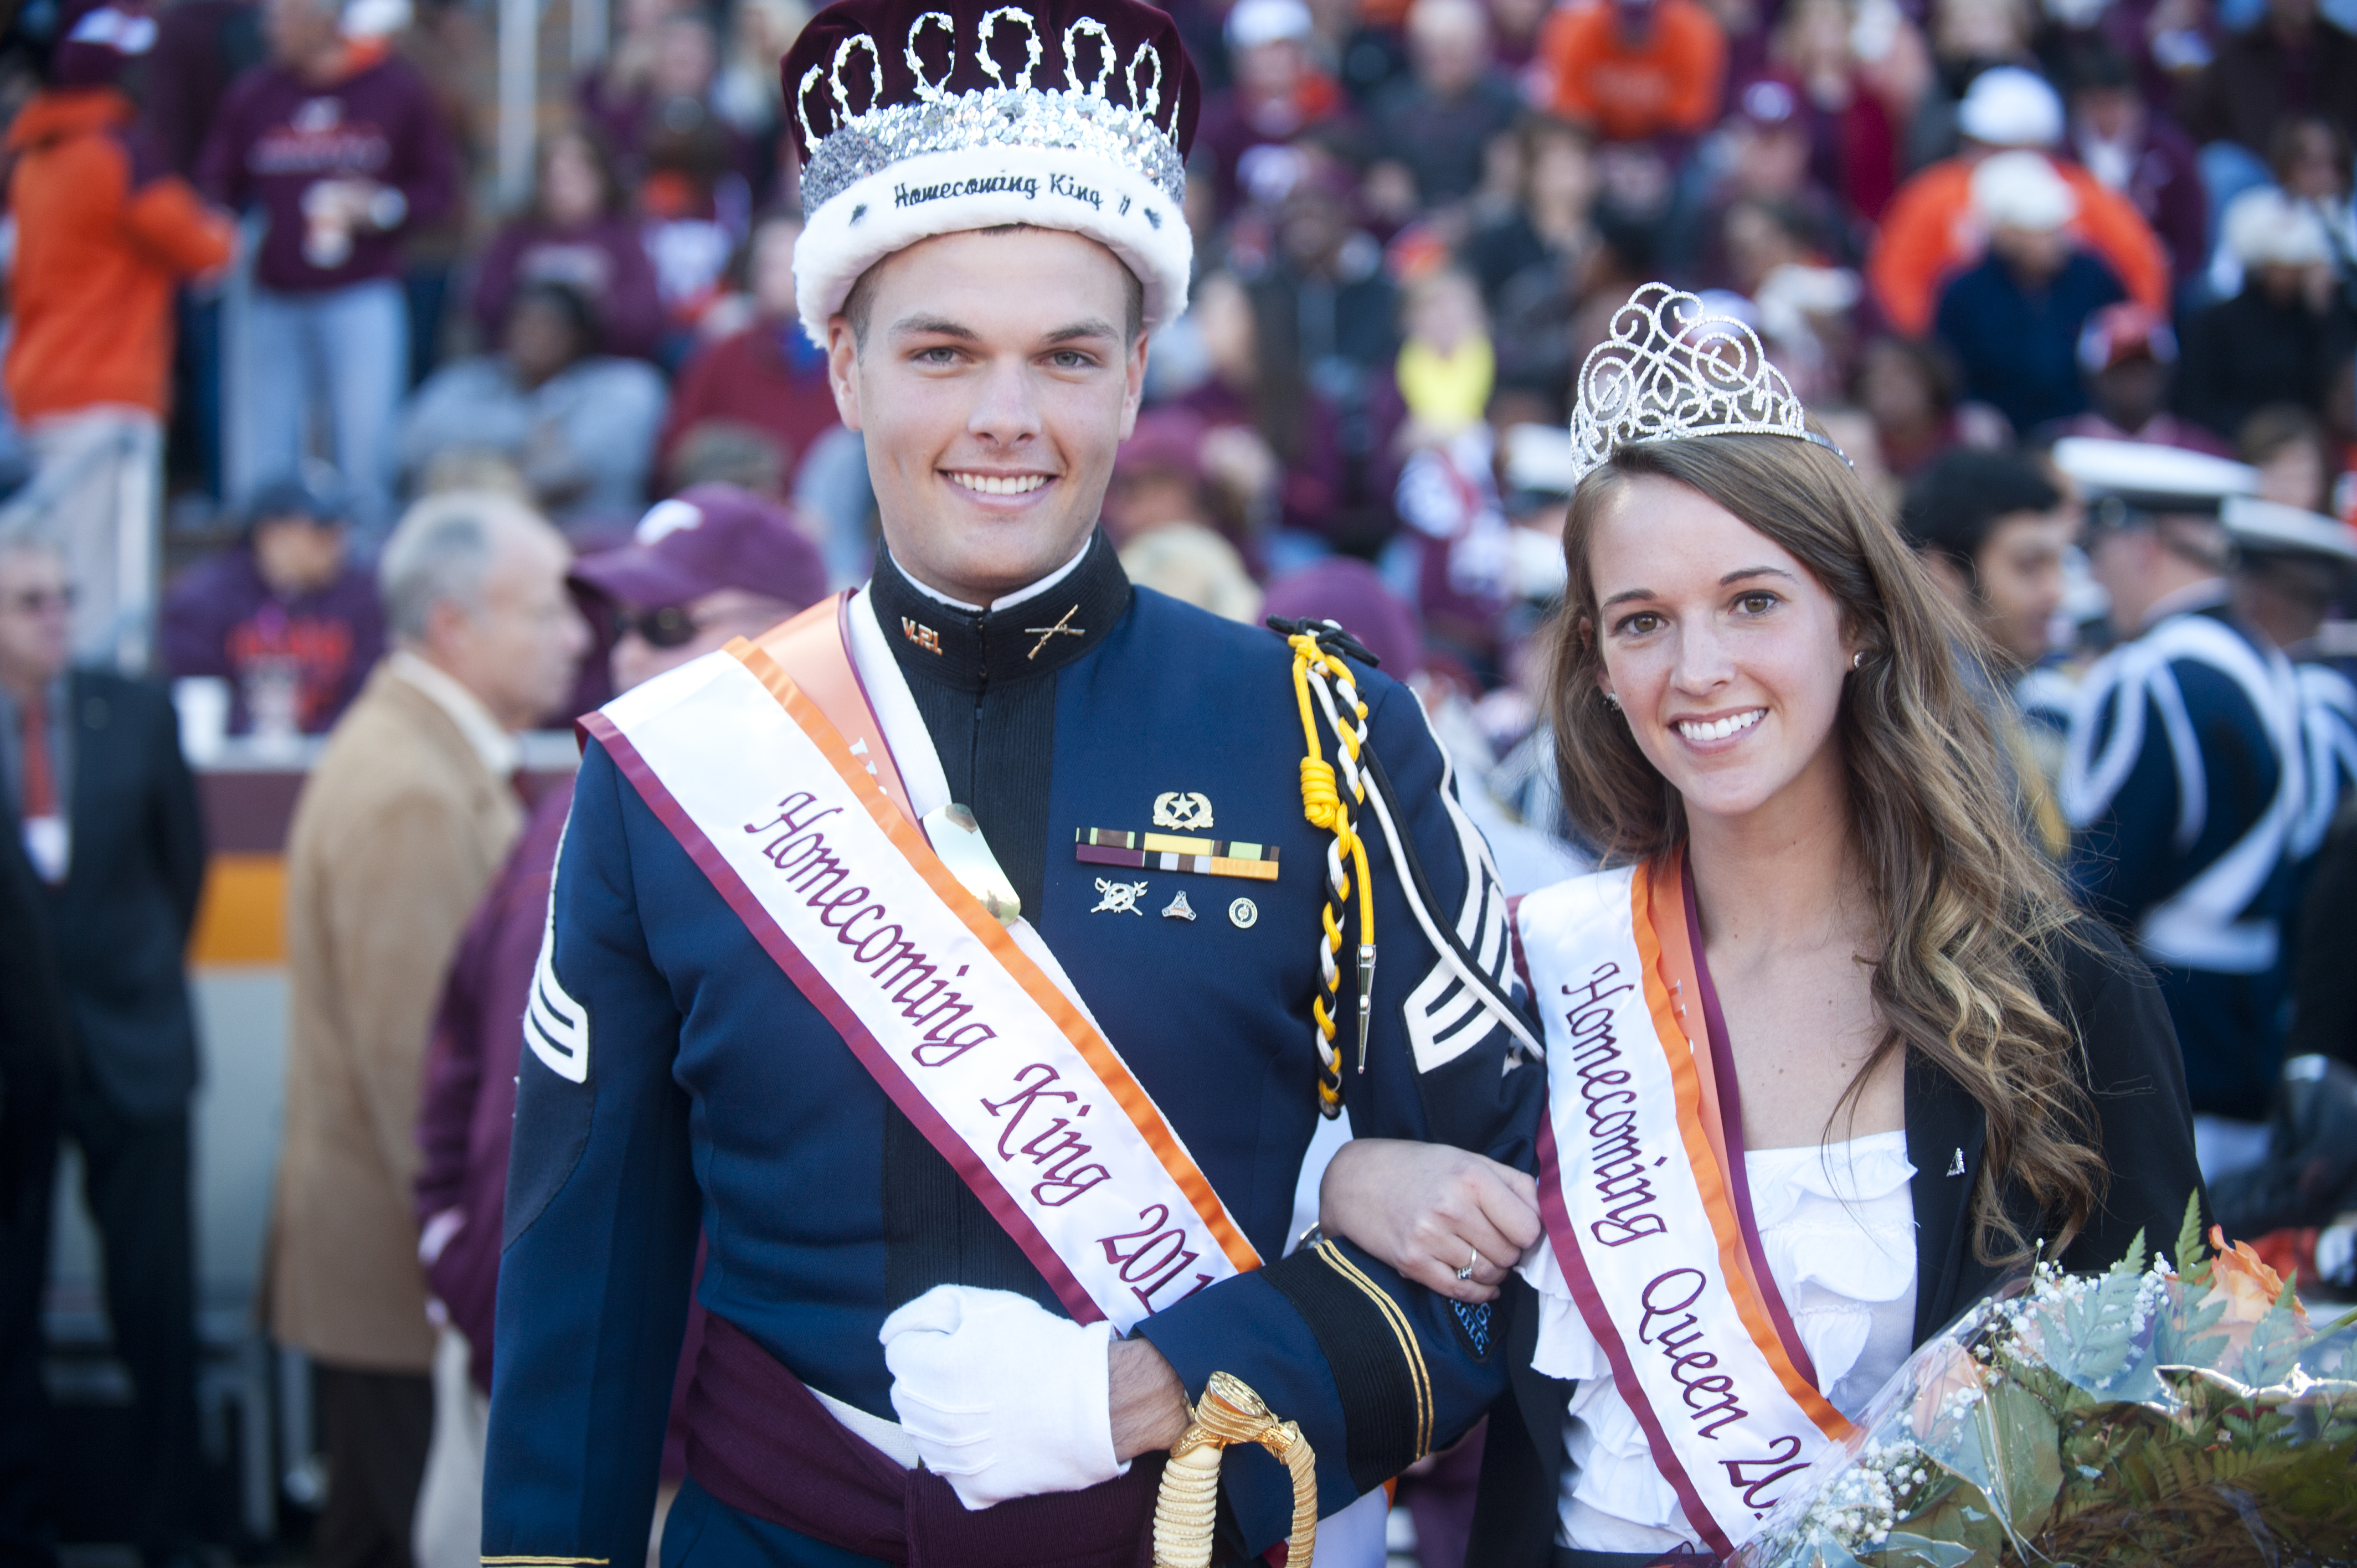 2011 Homecoming King Kyle Amonson and Queen Sue Buyrn